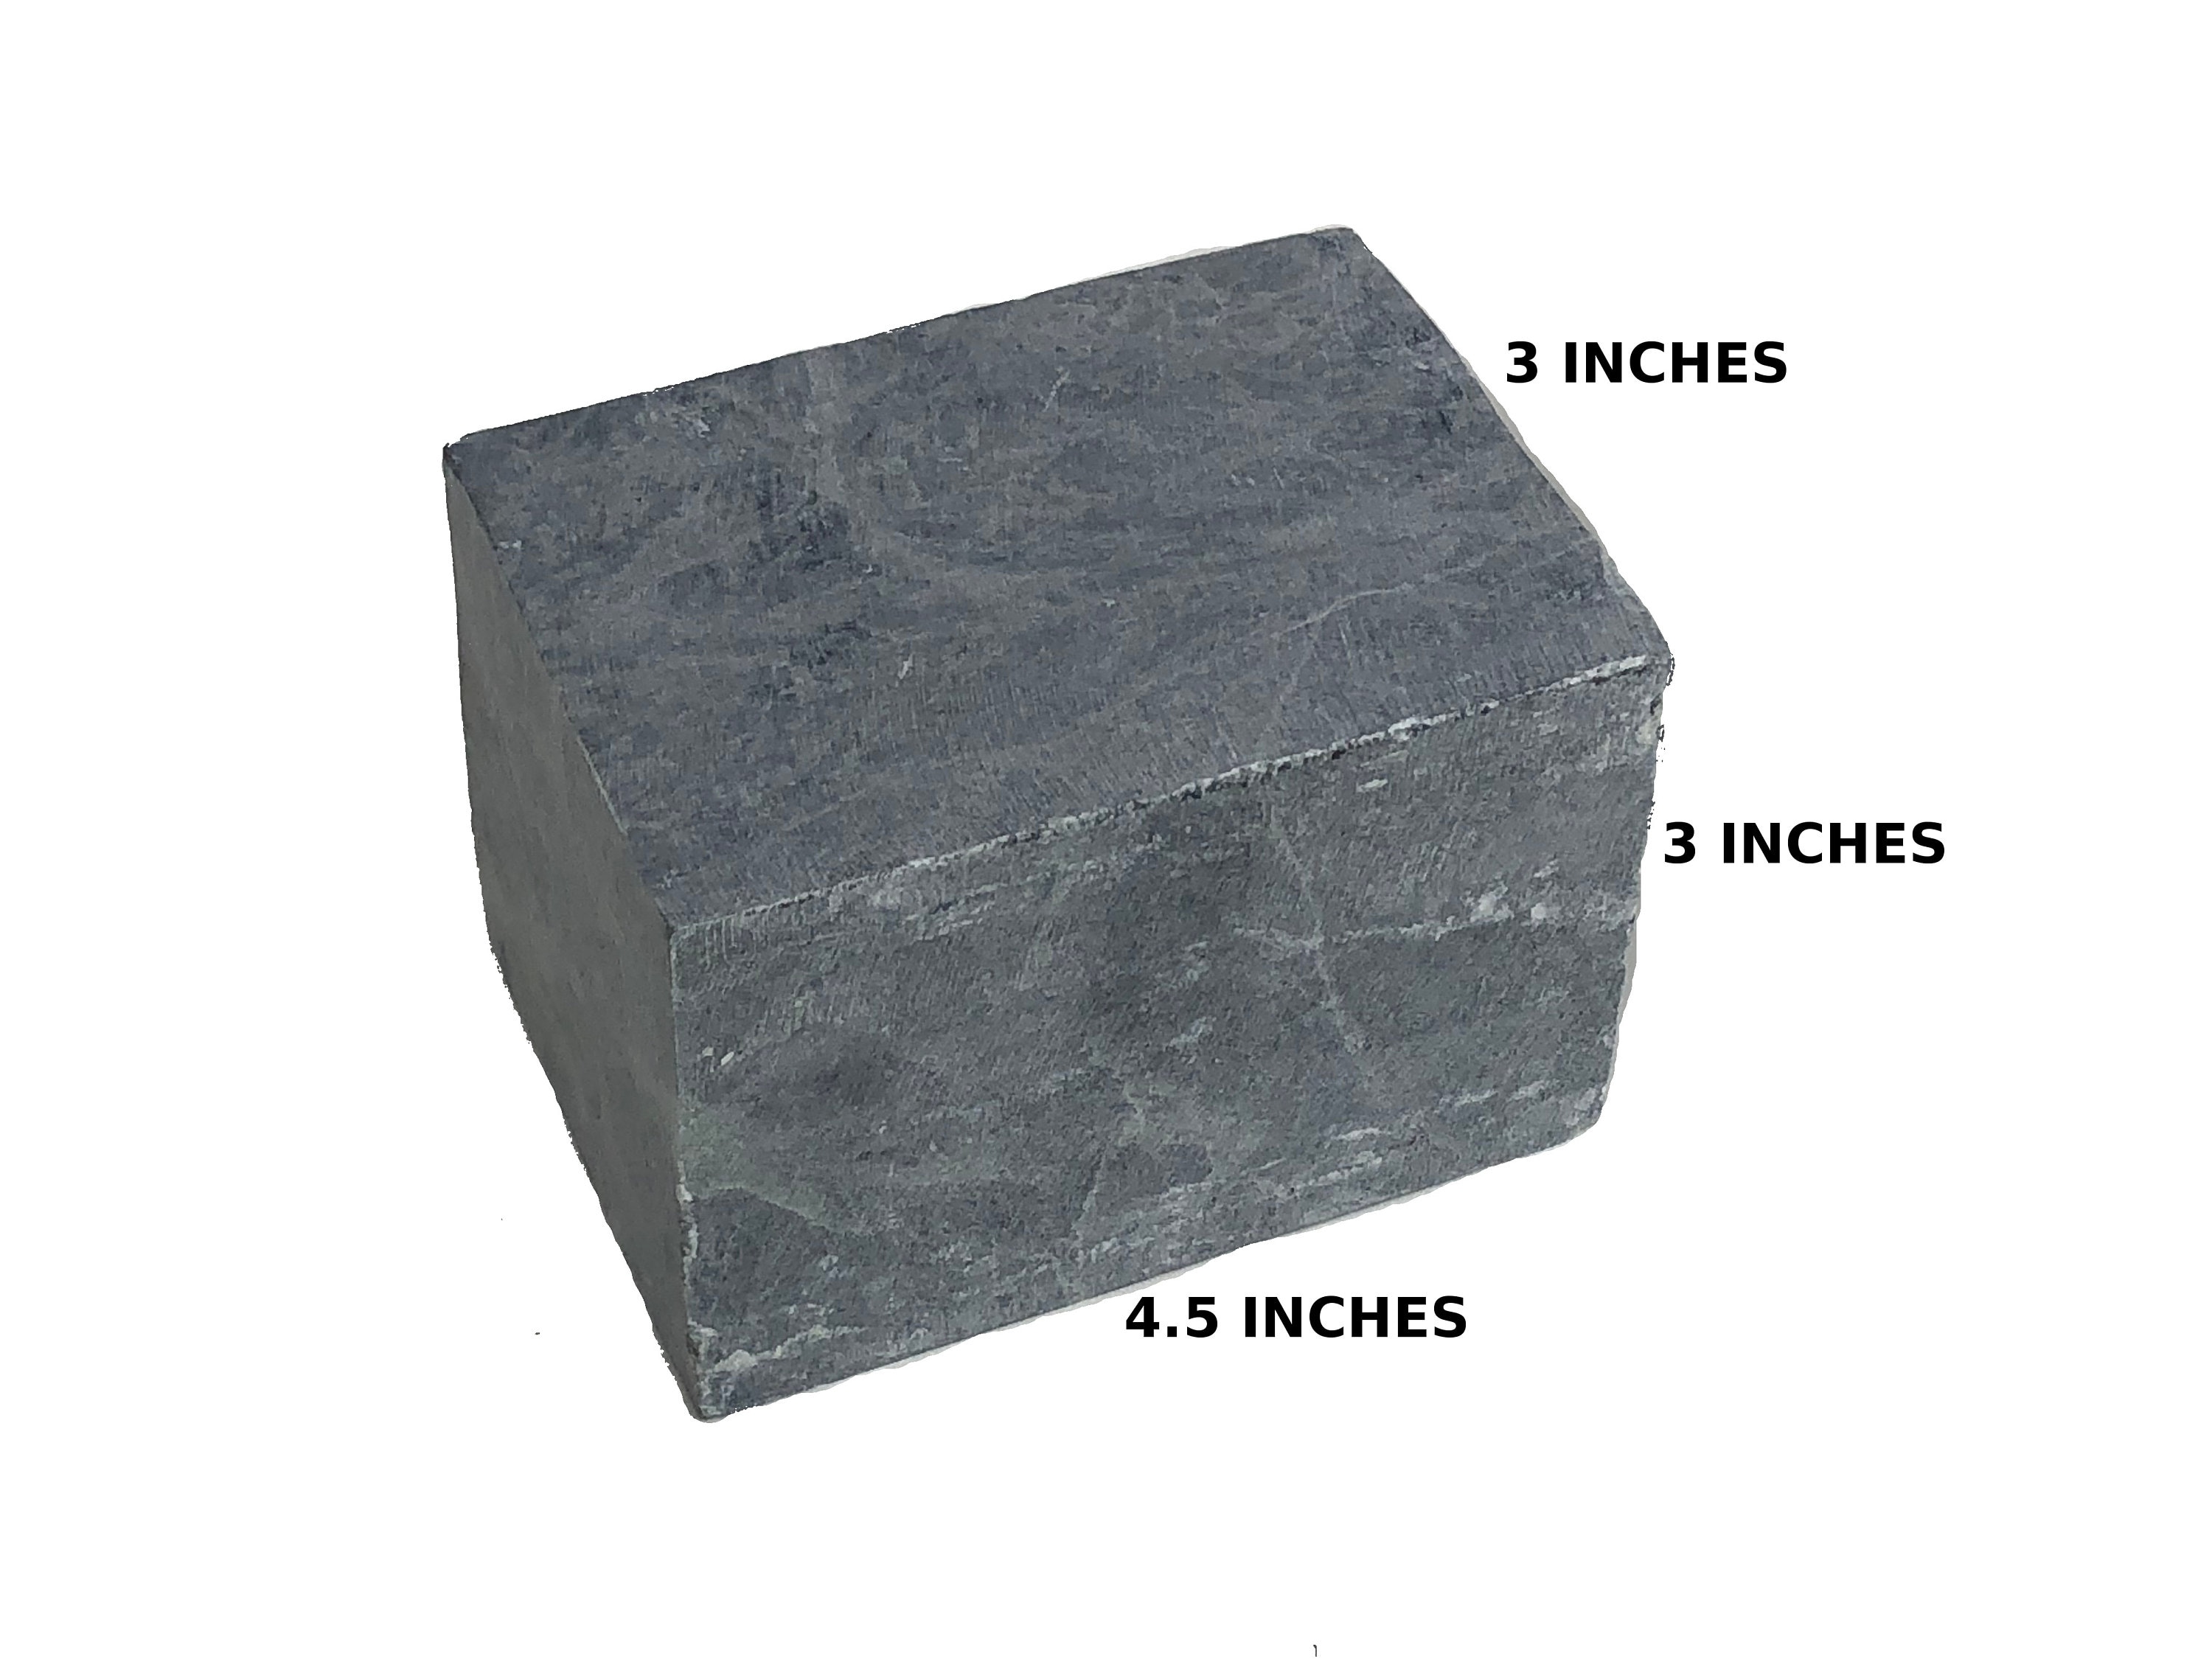 .com: Soapstone for Carving Block - 3'' x 3'' x 5'' - Great